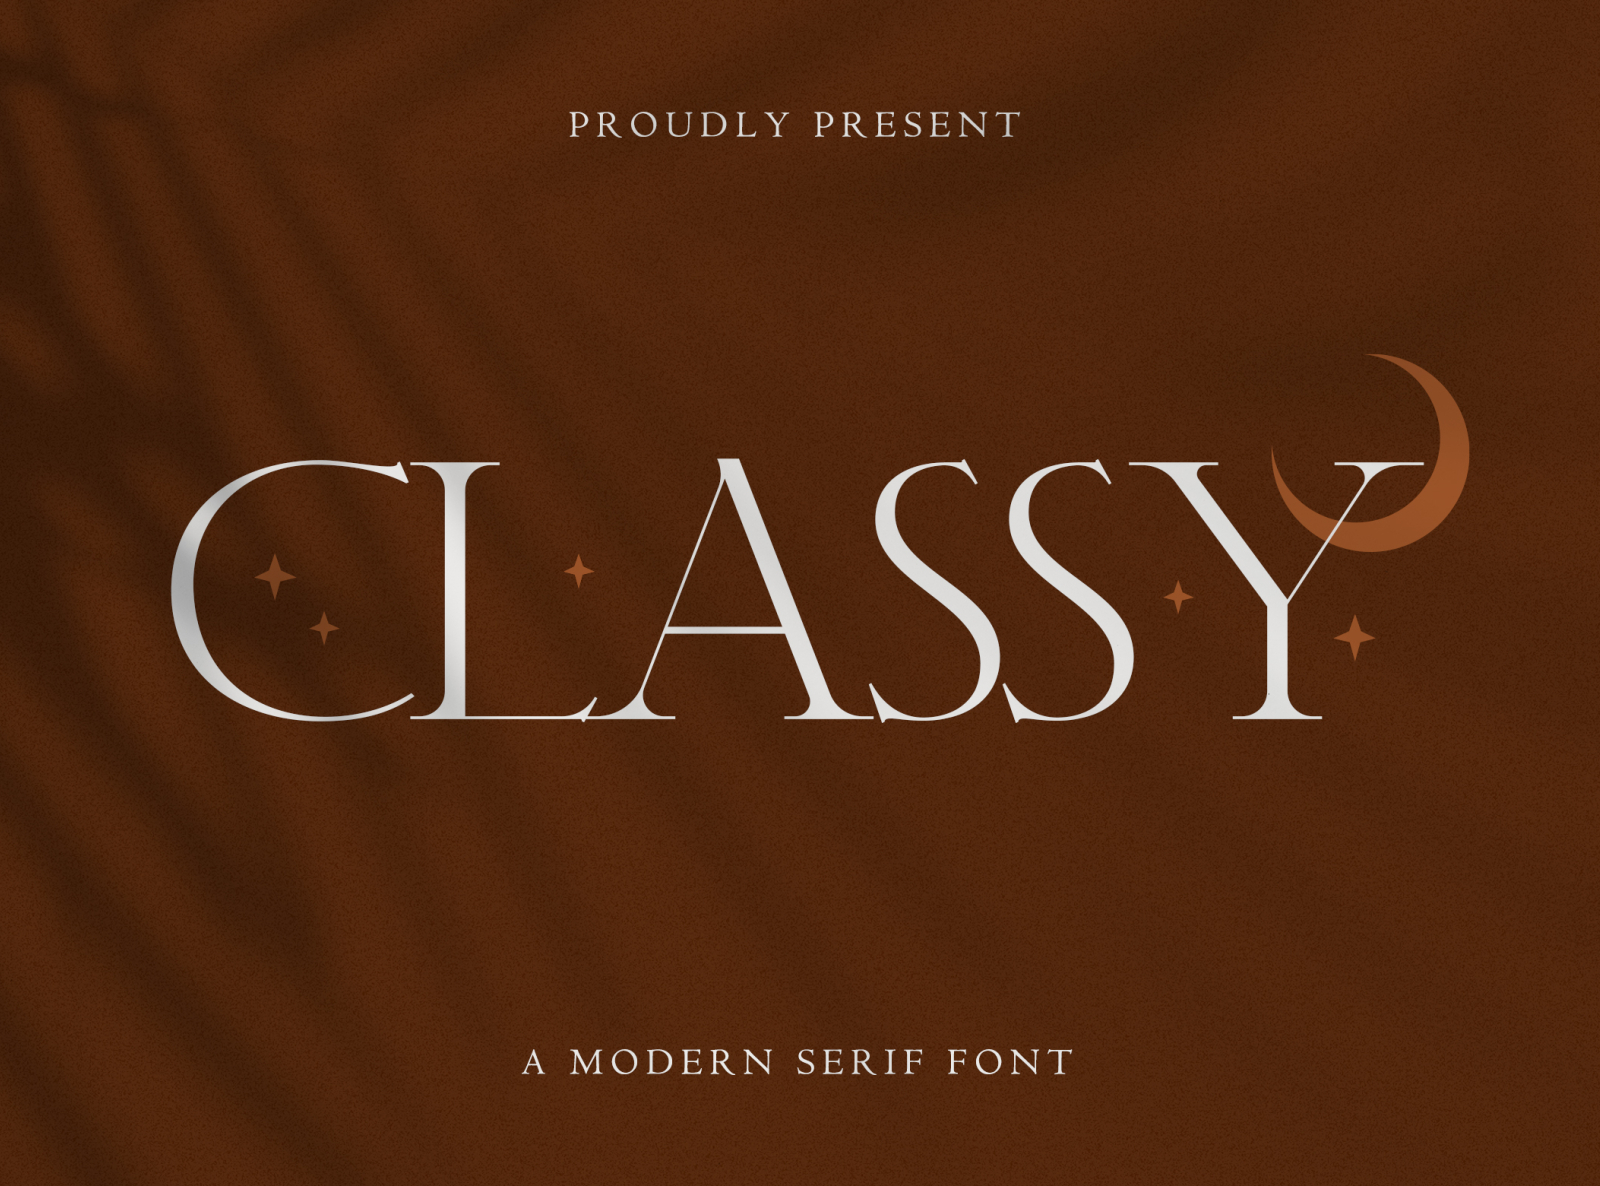 Classy – Modern Serif Font by TypeFactory Co on Dribbble